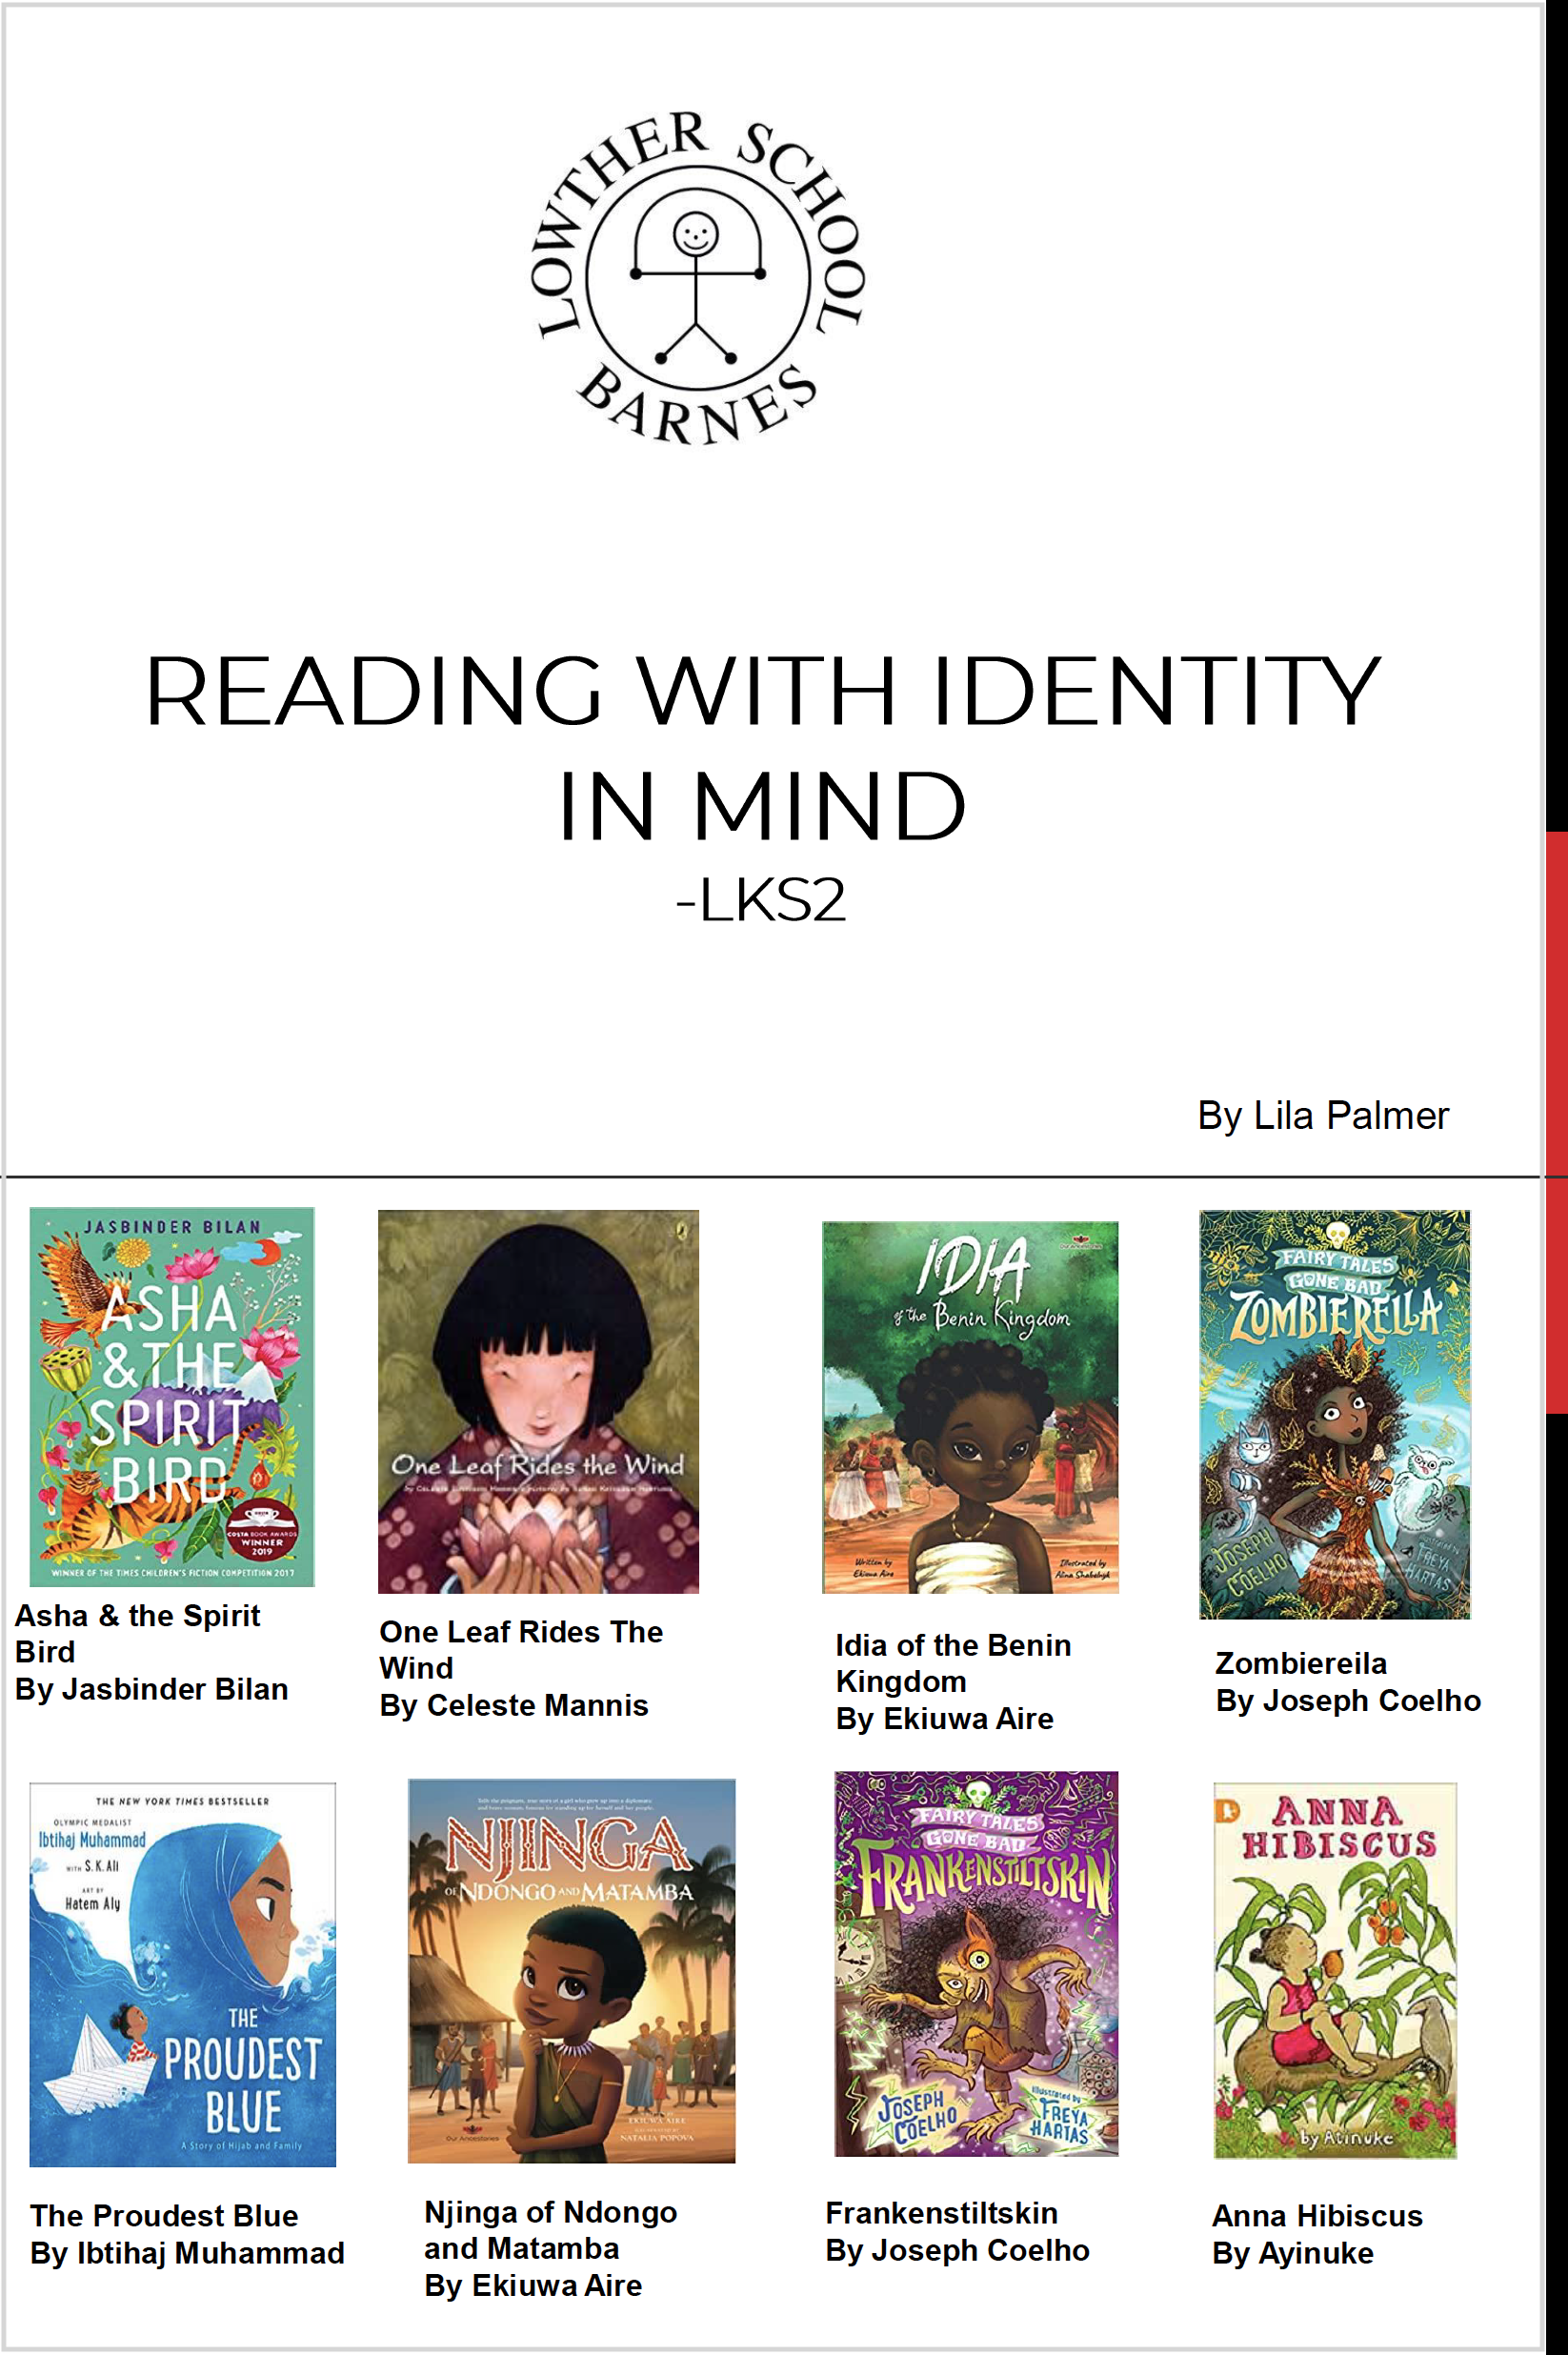 LKS2 Reading with identity in mind PDF link